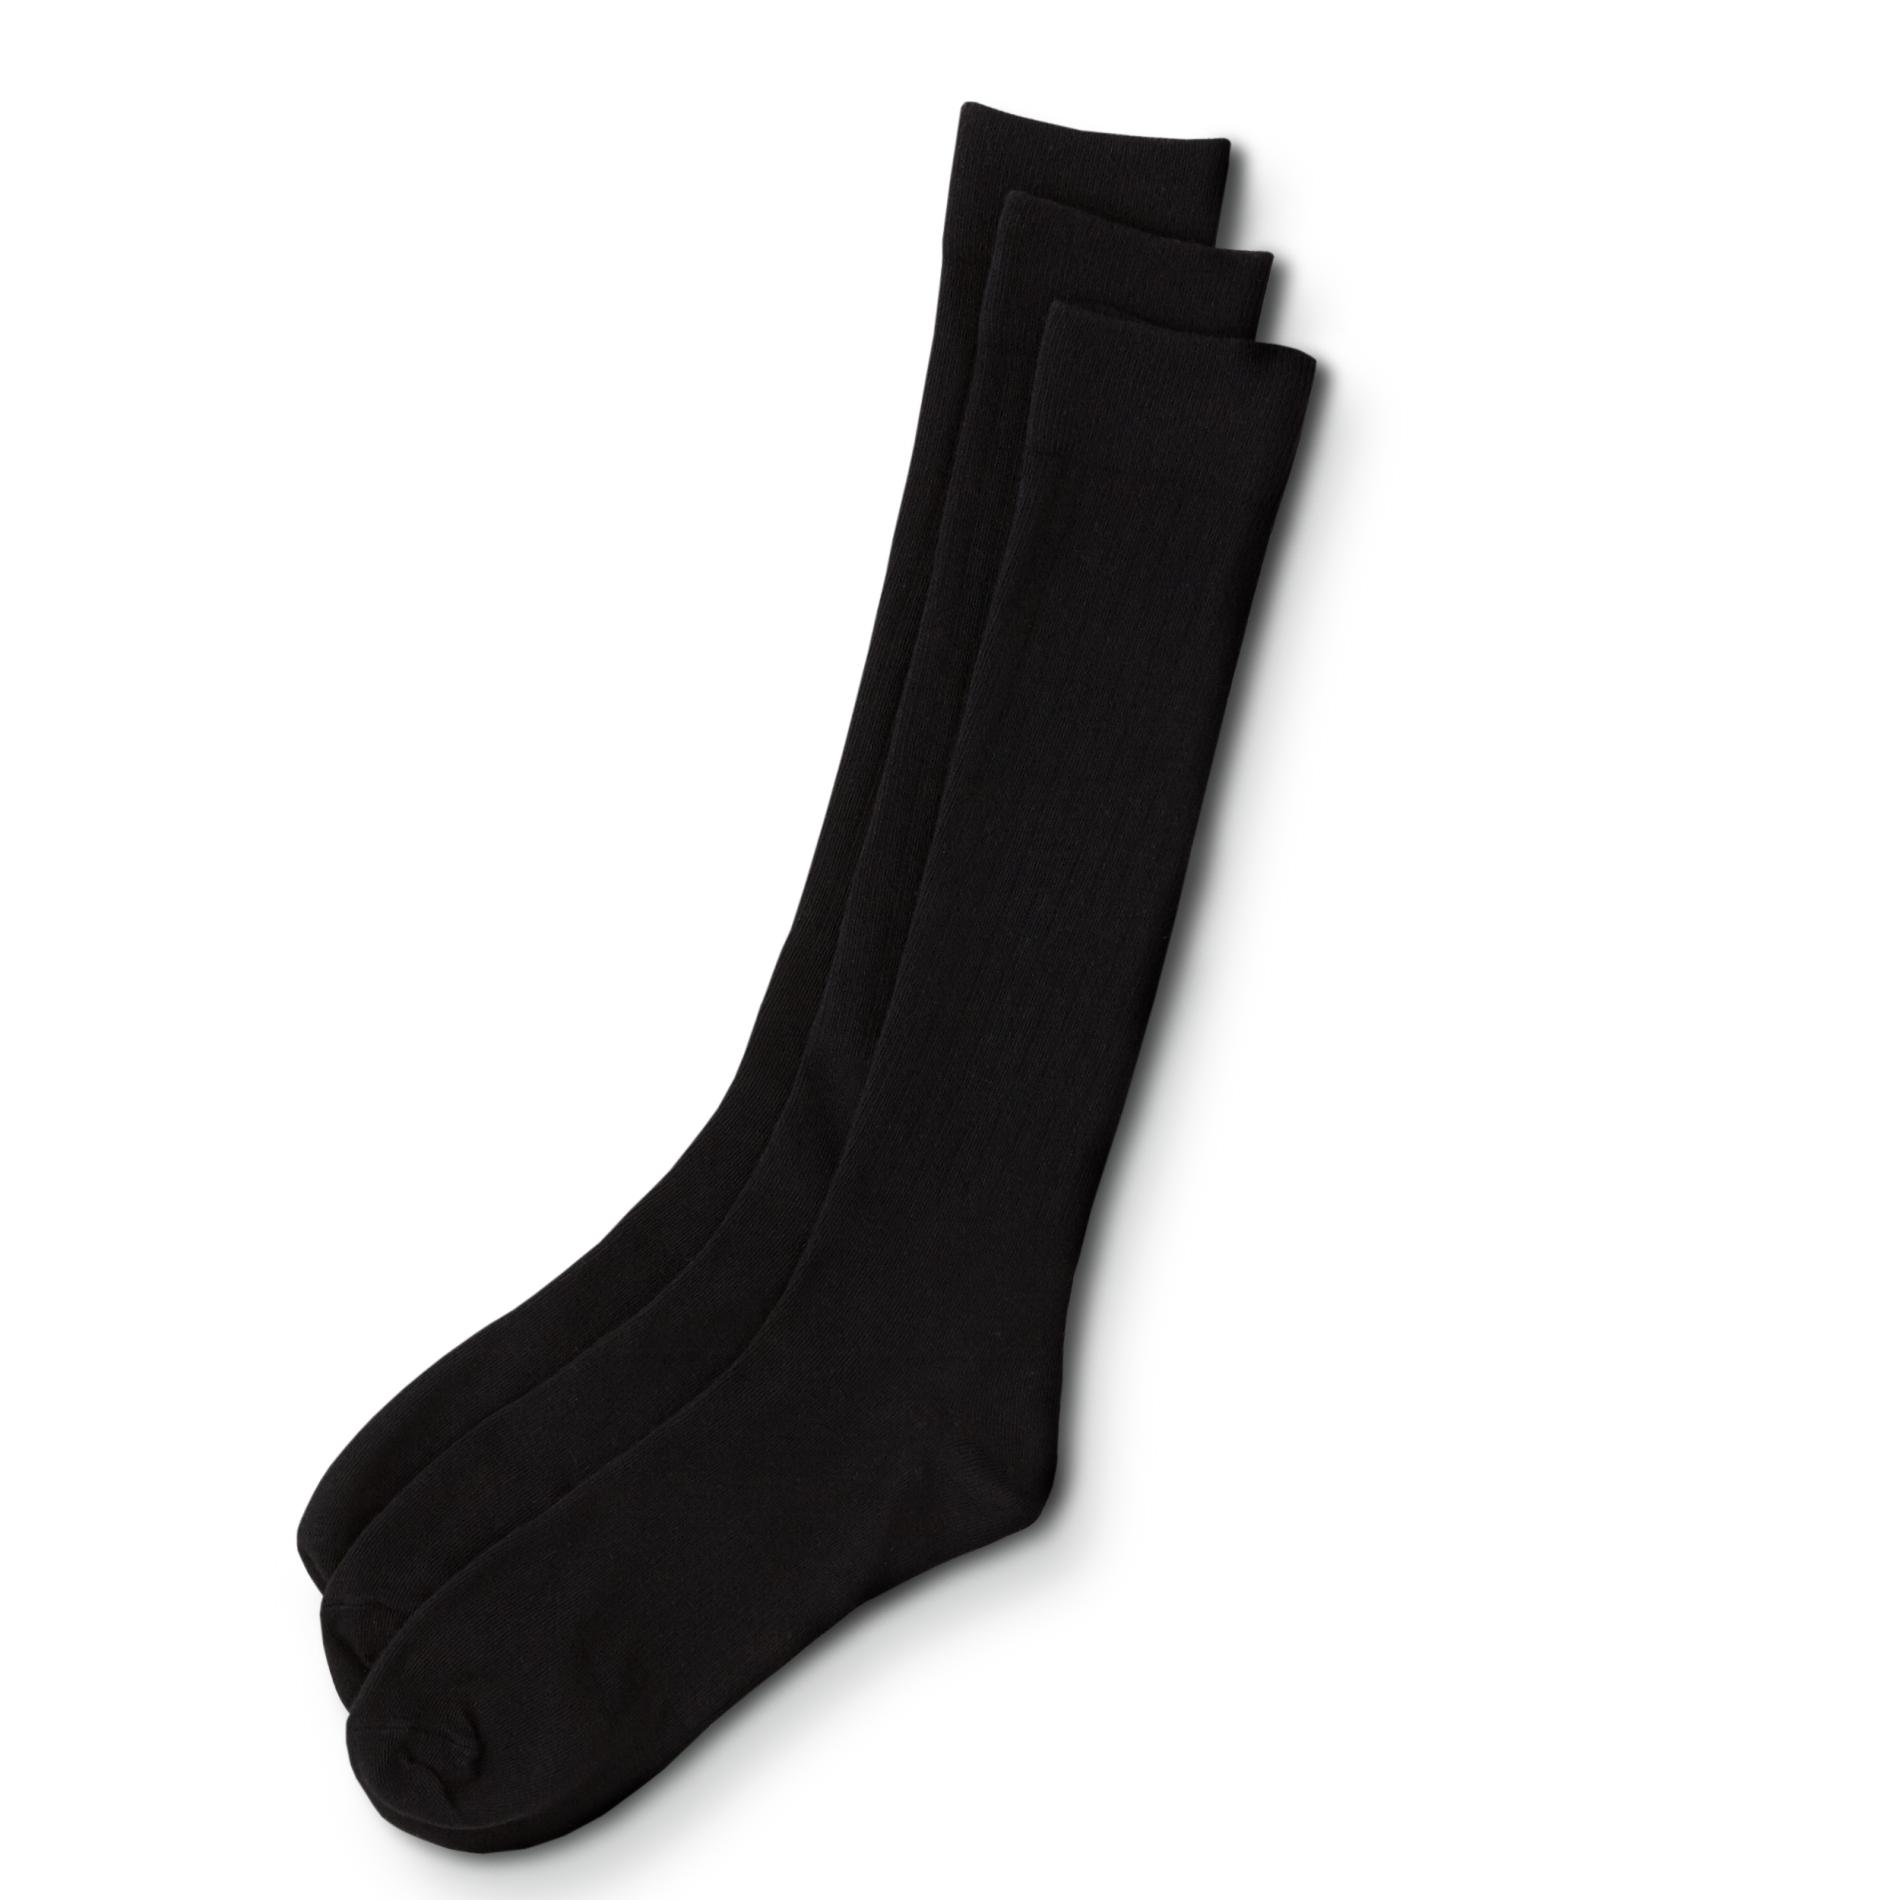 Simply Styled Men's 3-Pairs Support Fit Over-the-Calf Socks